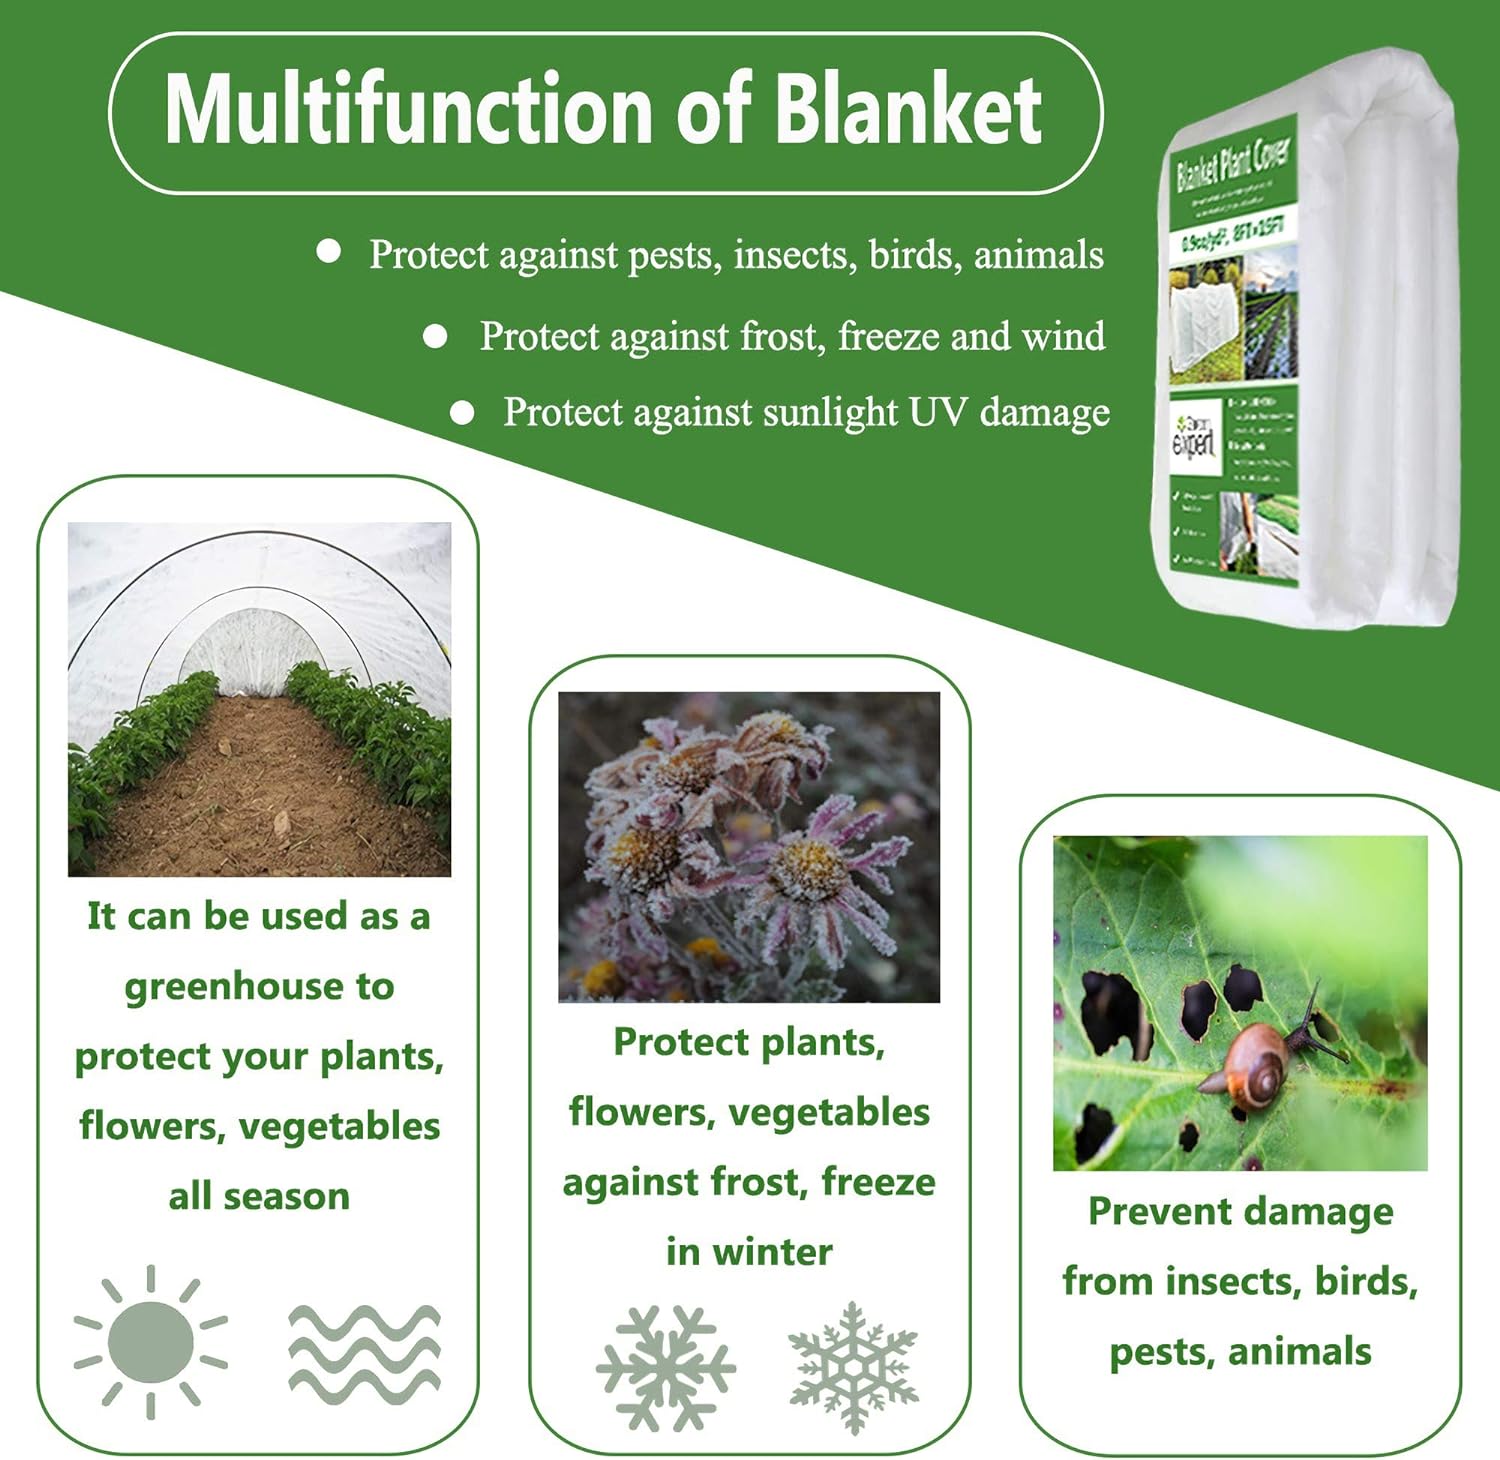 Amazon.com : Garden expert Plant Covers Freeze Protection Floating Row Cover 0.9oz Fabric Frost Cloth Plant Blanket for Plants  Vegetables in Winter(8FTx15FT,with 6 PCS Staples Stakes) : Patio, Lawn  Garden